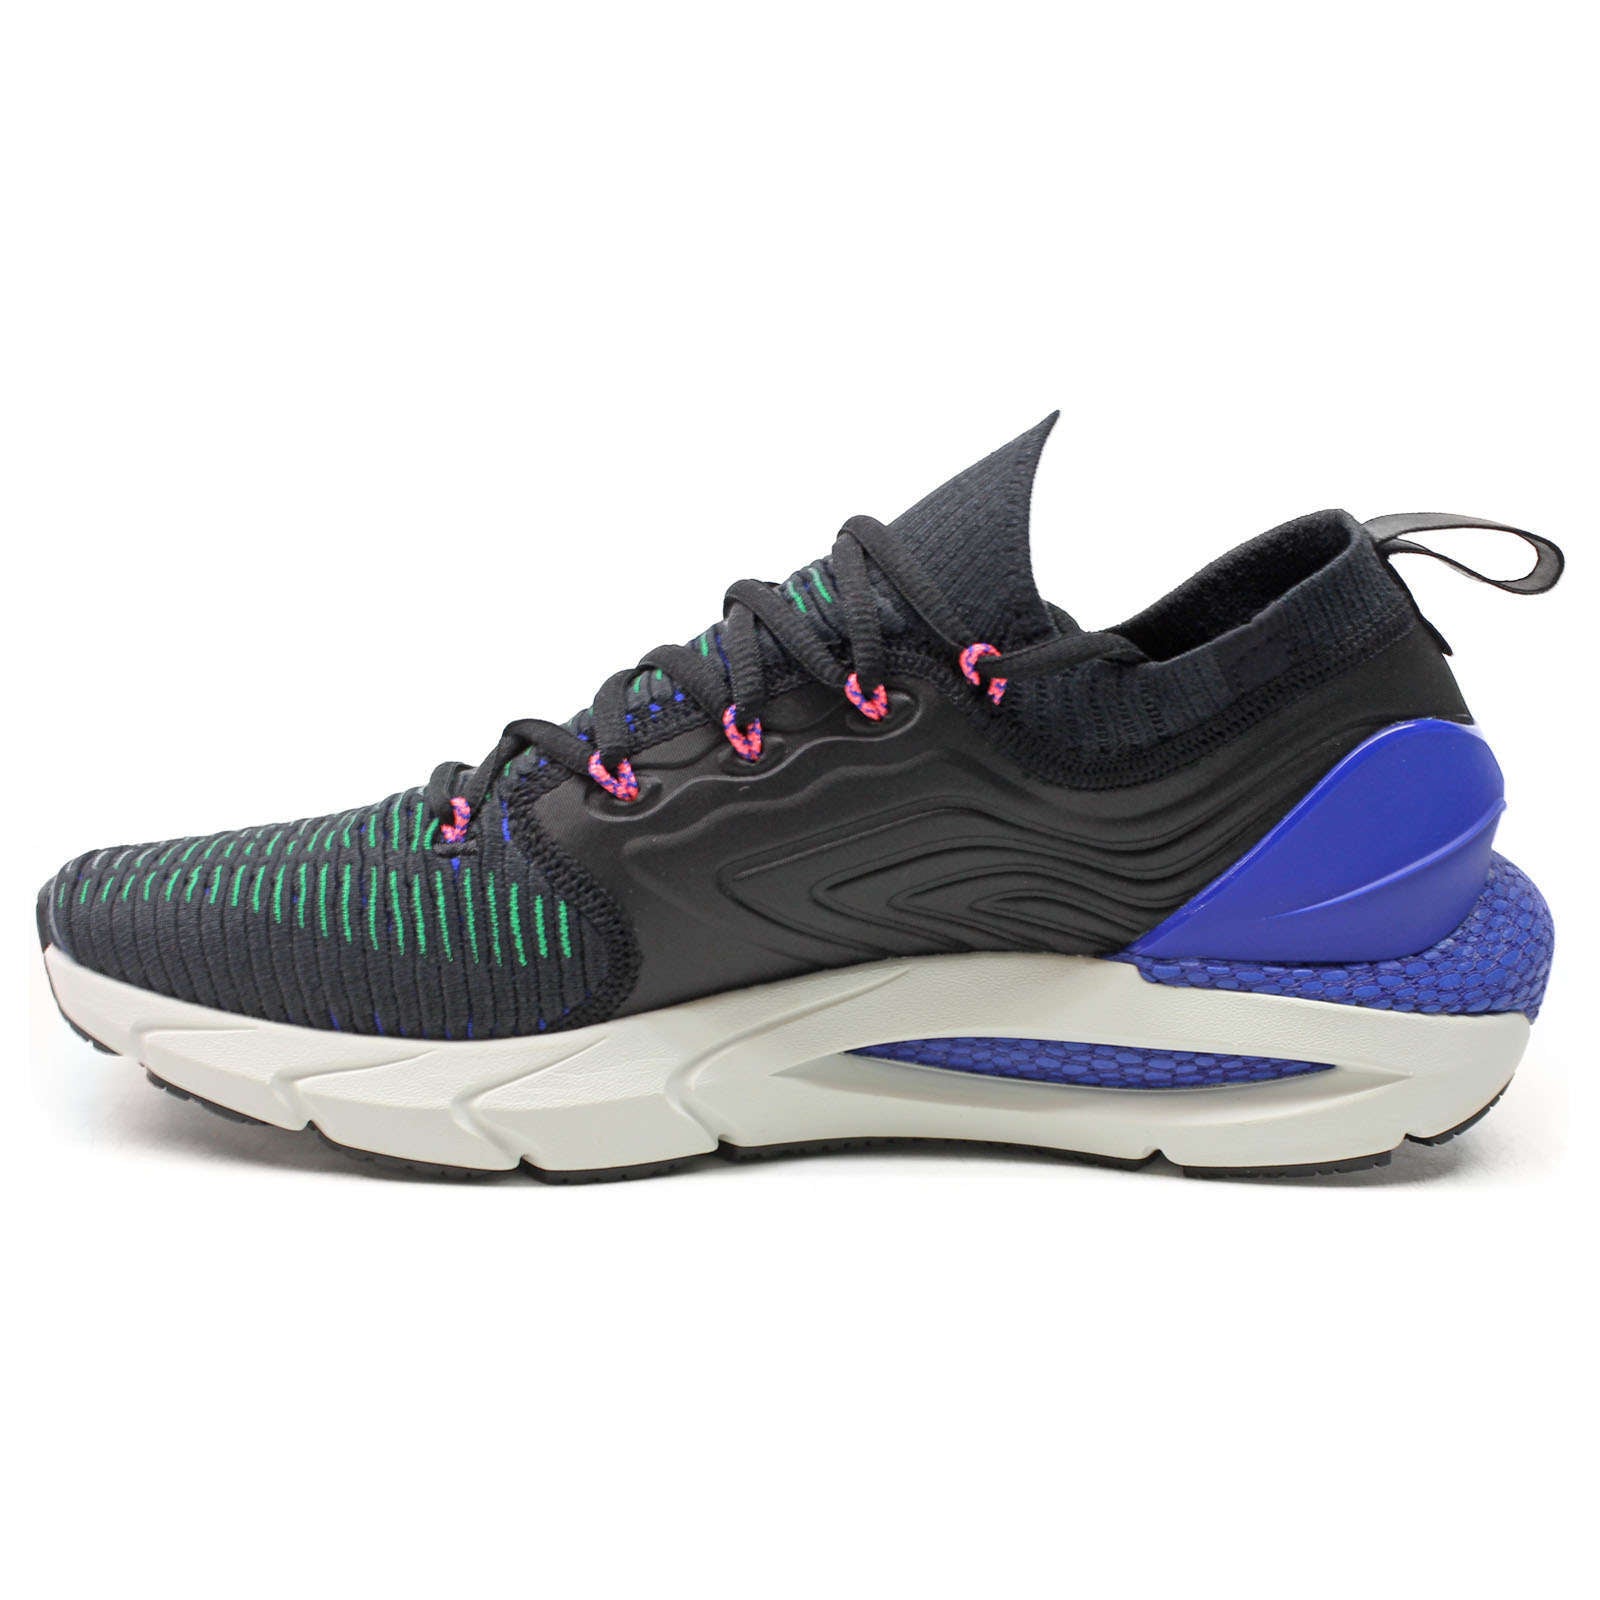 Under Armour HOVR Phantom 2 INKNT Synthetic Textile Men's Low-Top Trainers#color_black blue